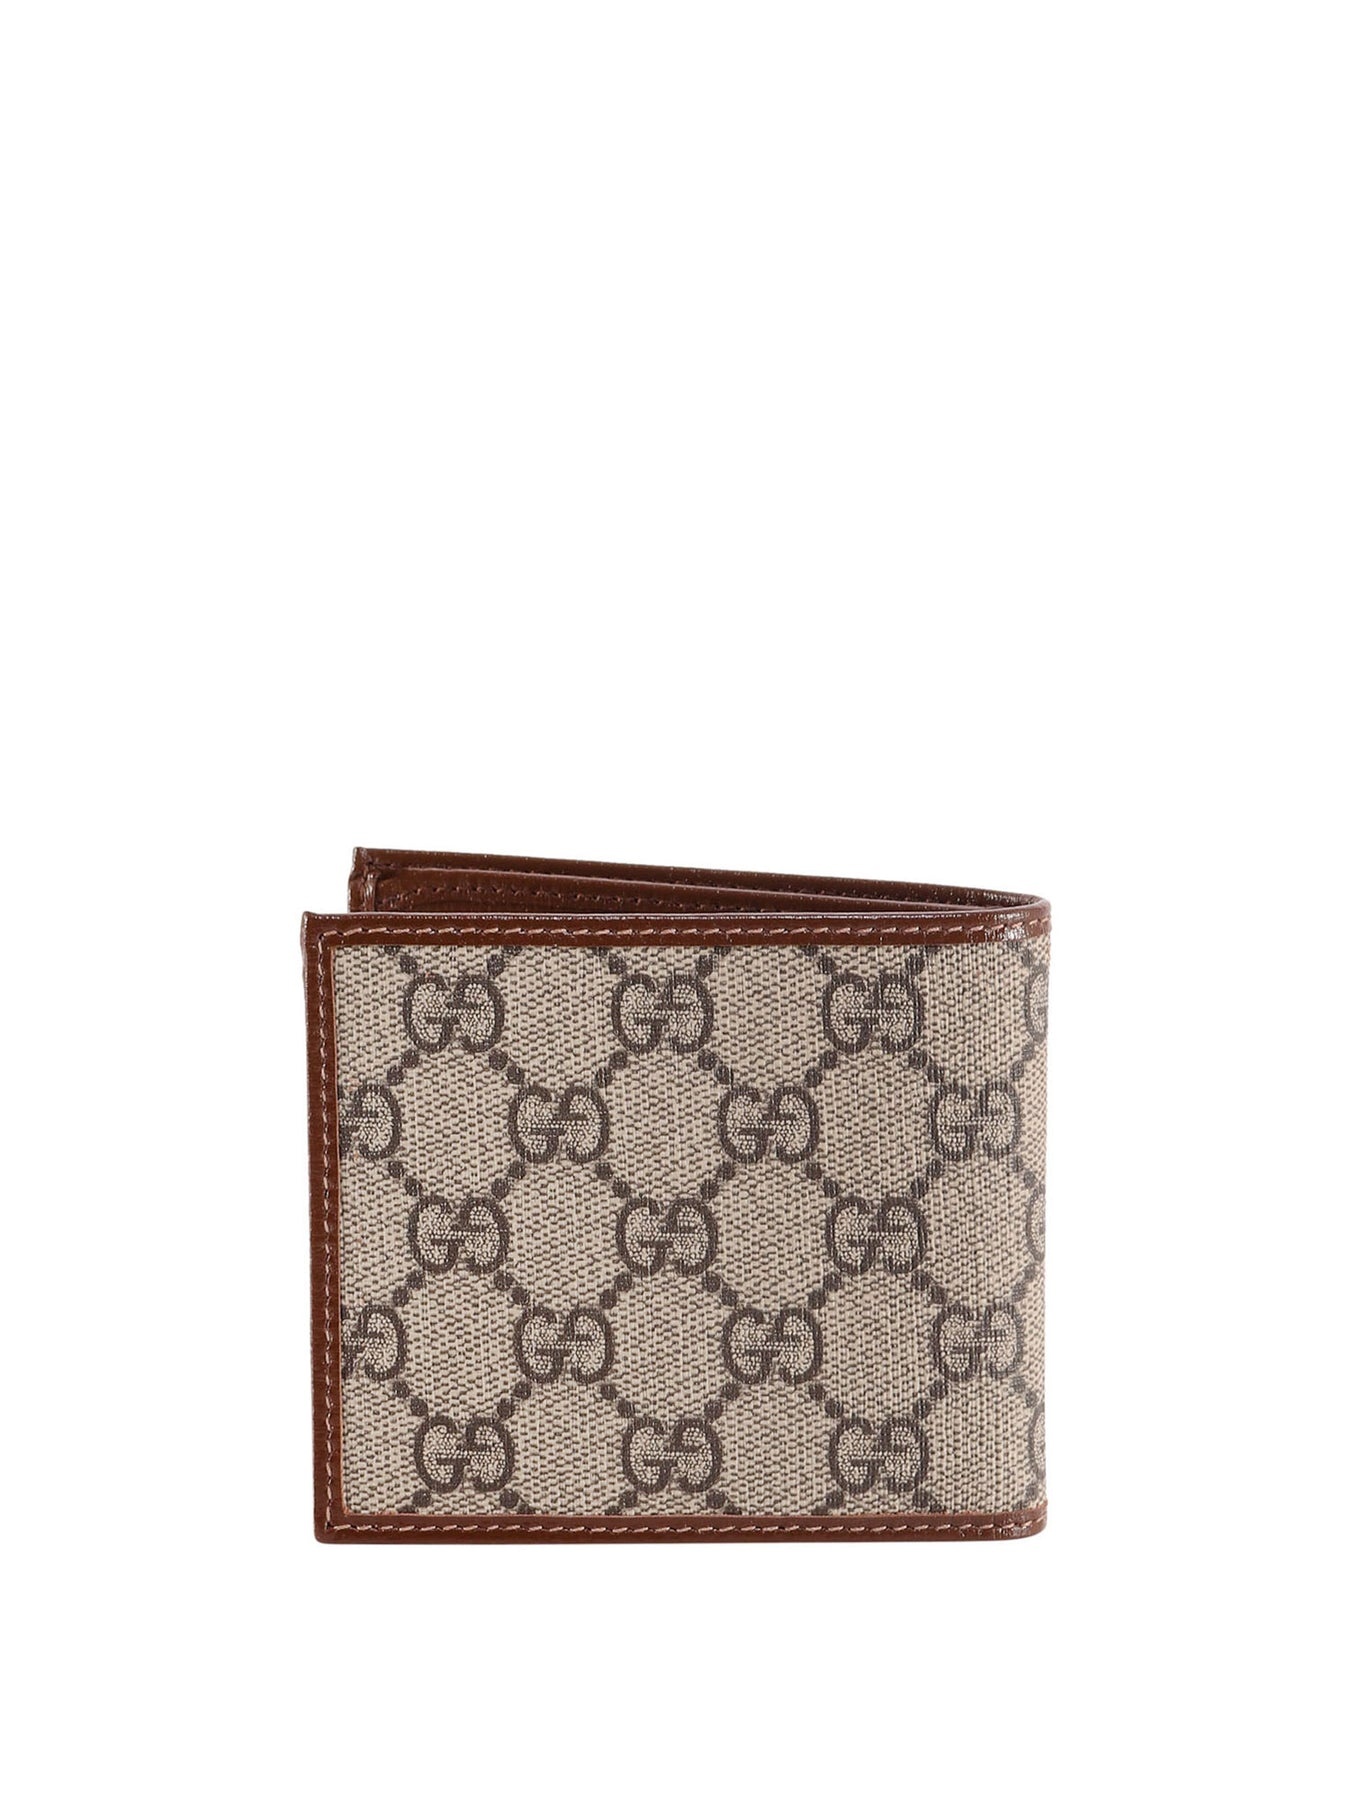 GG wallet with oval leather tag - 2